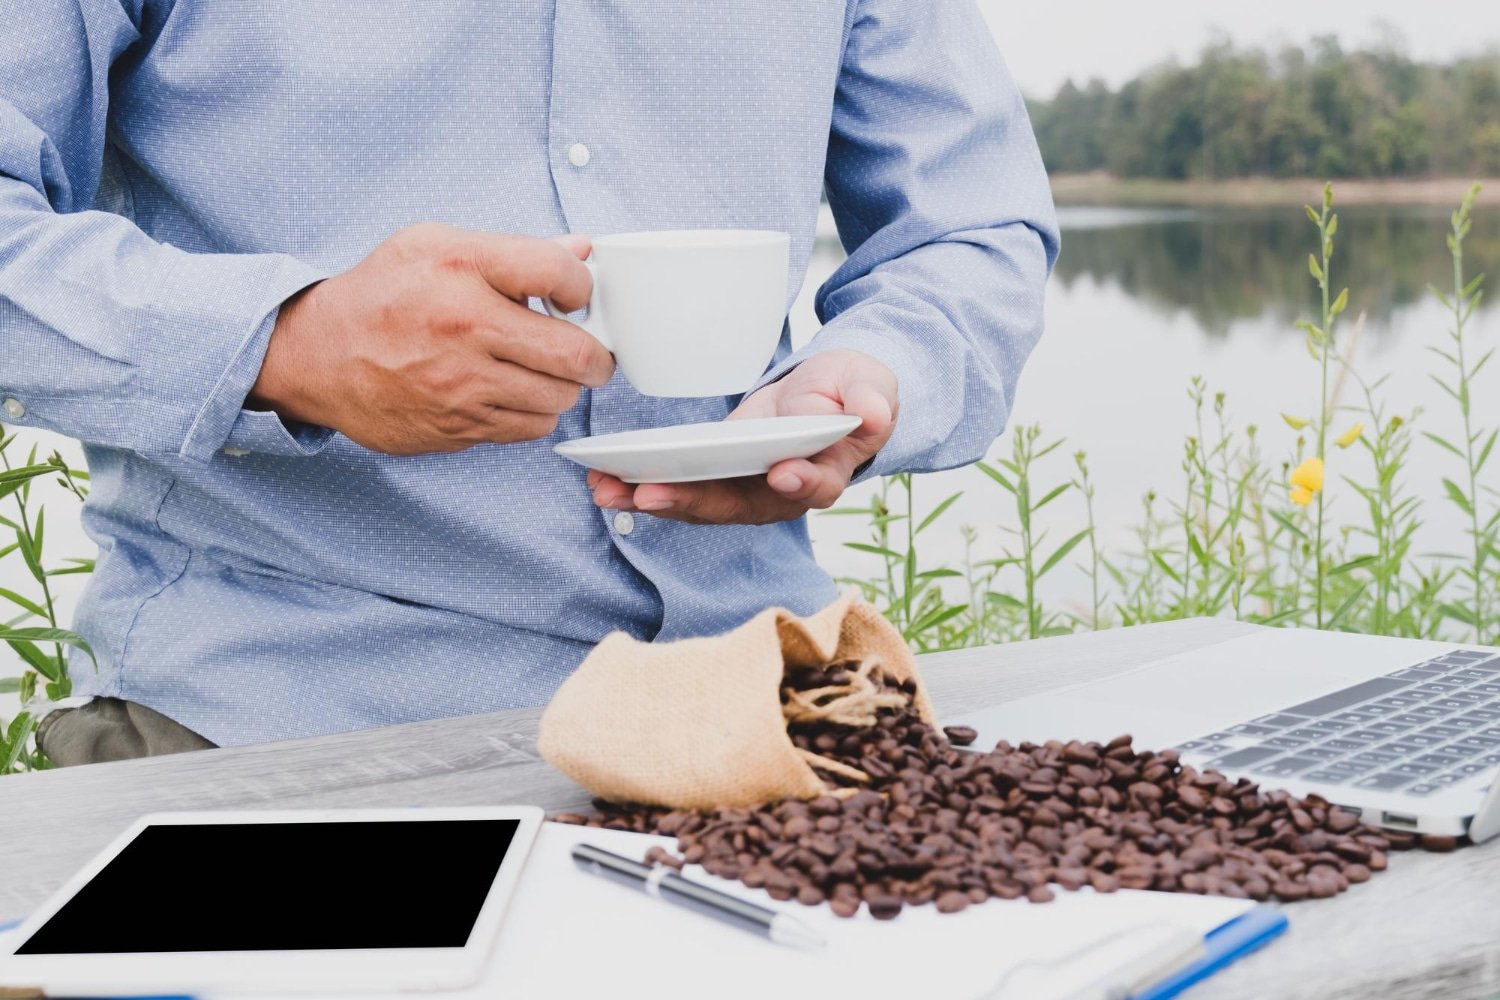 Relax And Unwind With DRIFTAWAY’s Personalized Coffee Subscriptions